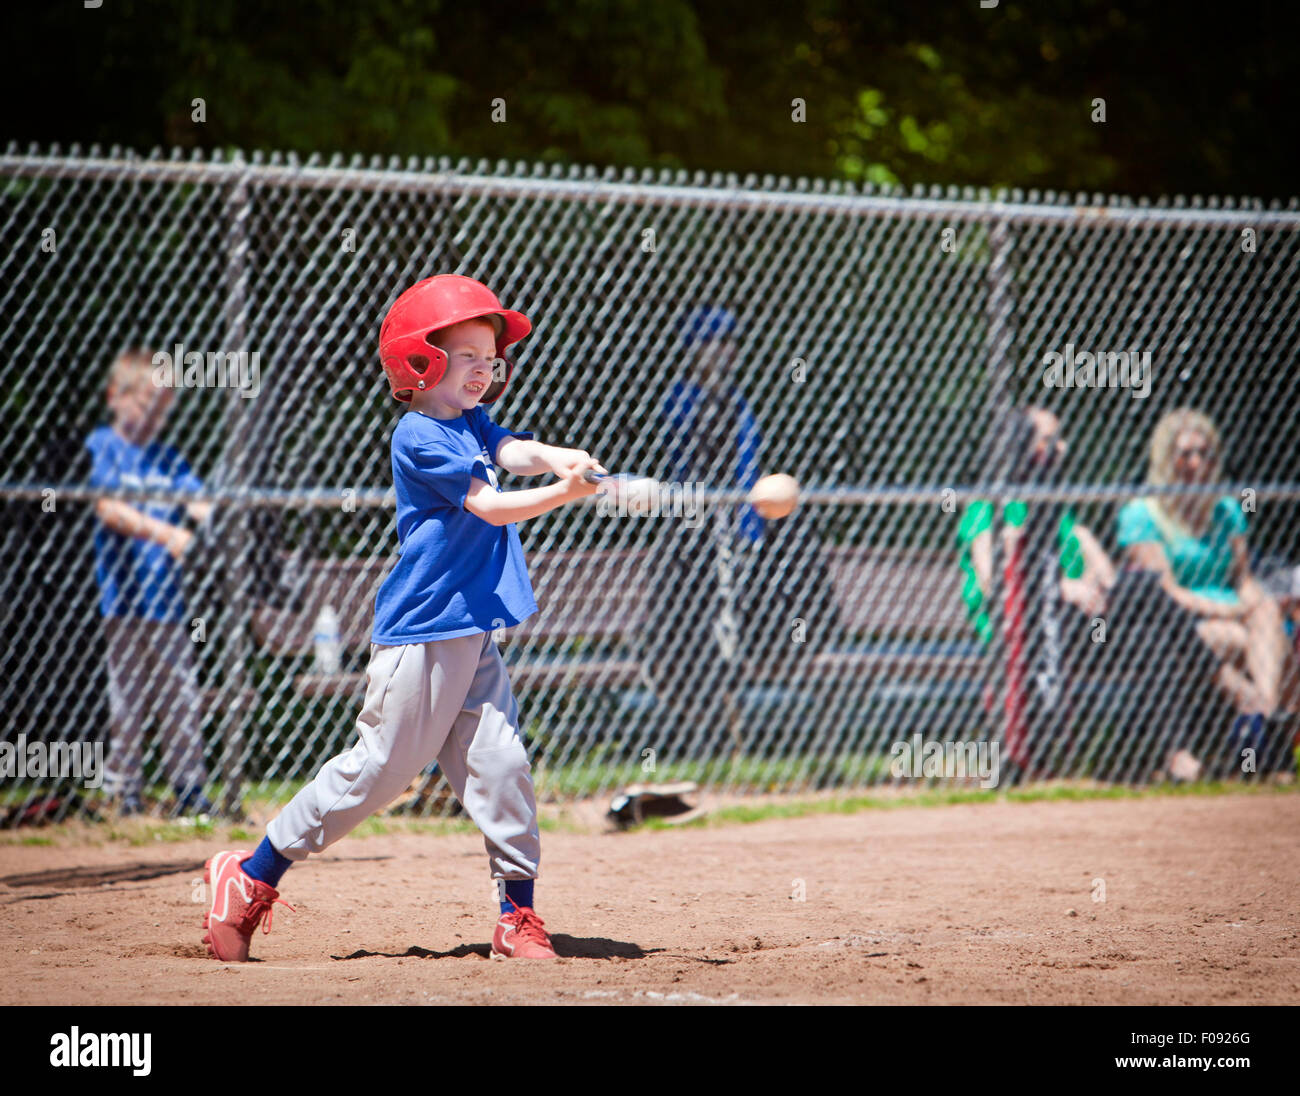 A youth baseball player takes a nice swing at the ball Stock Photo